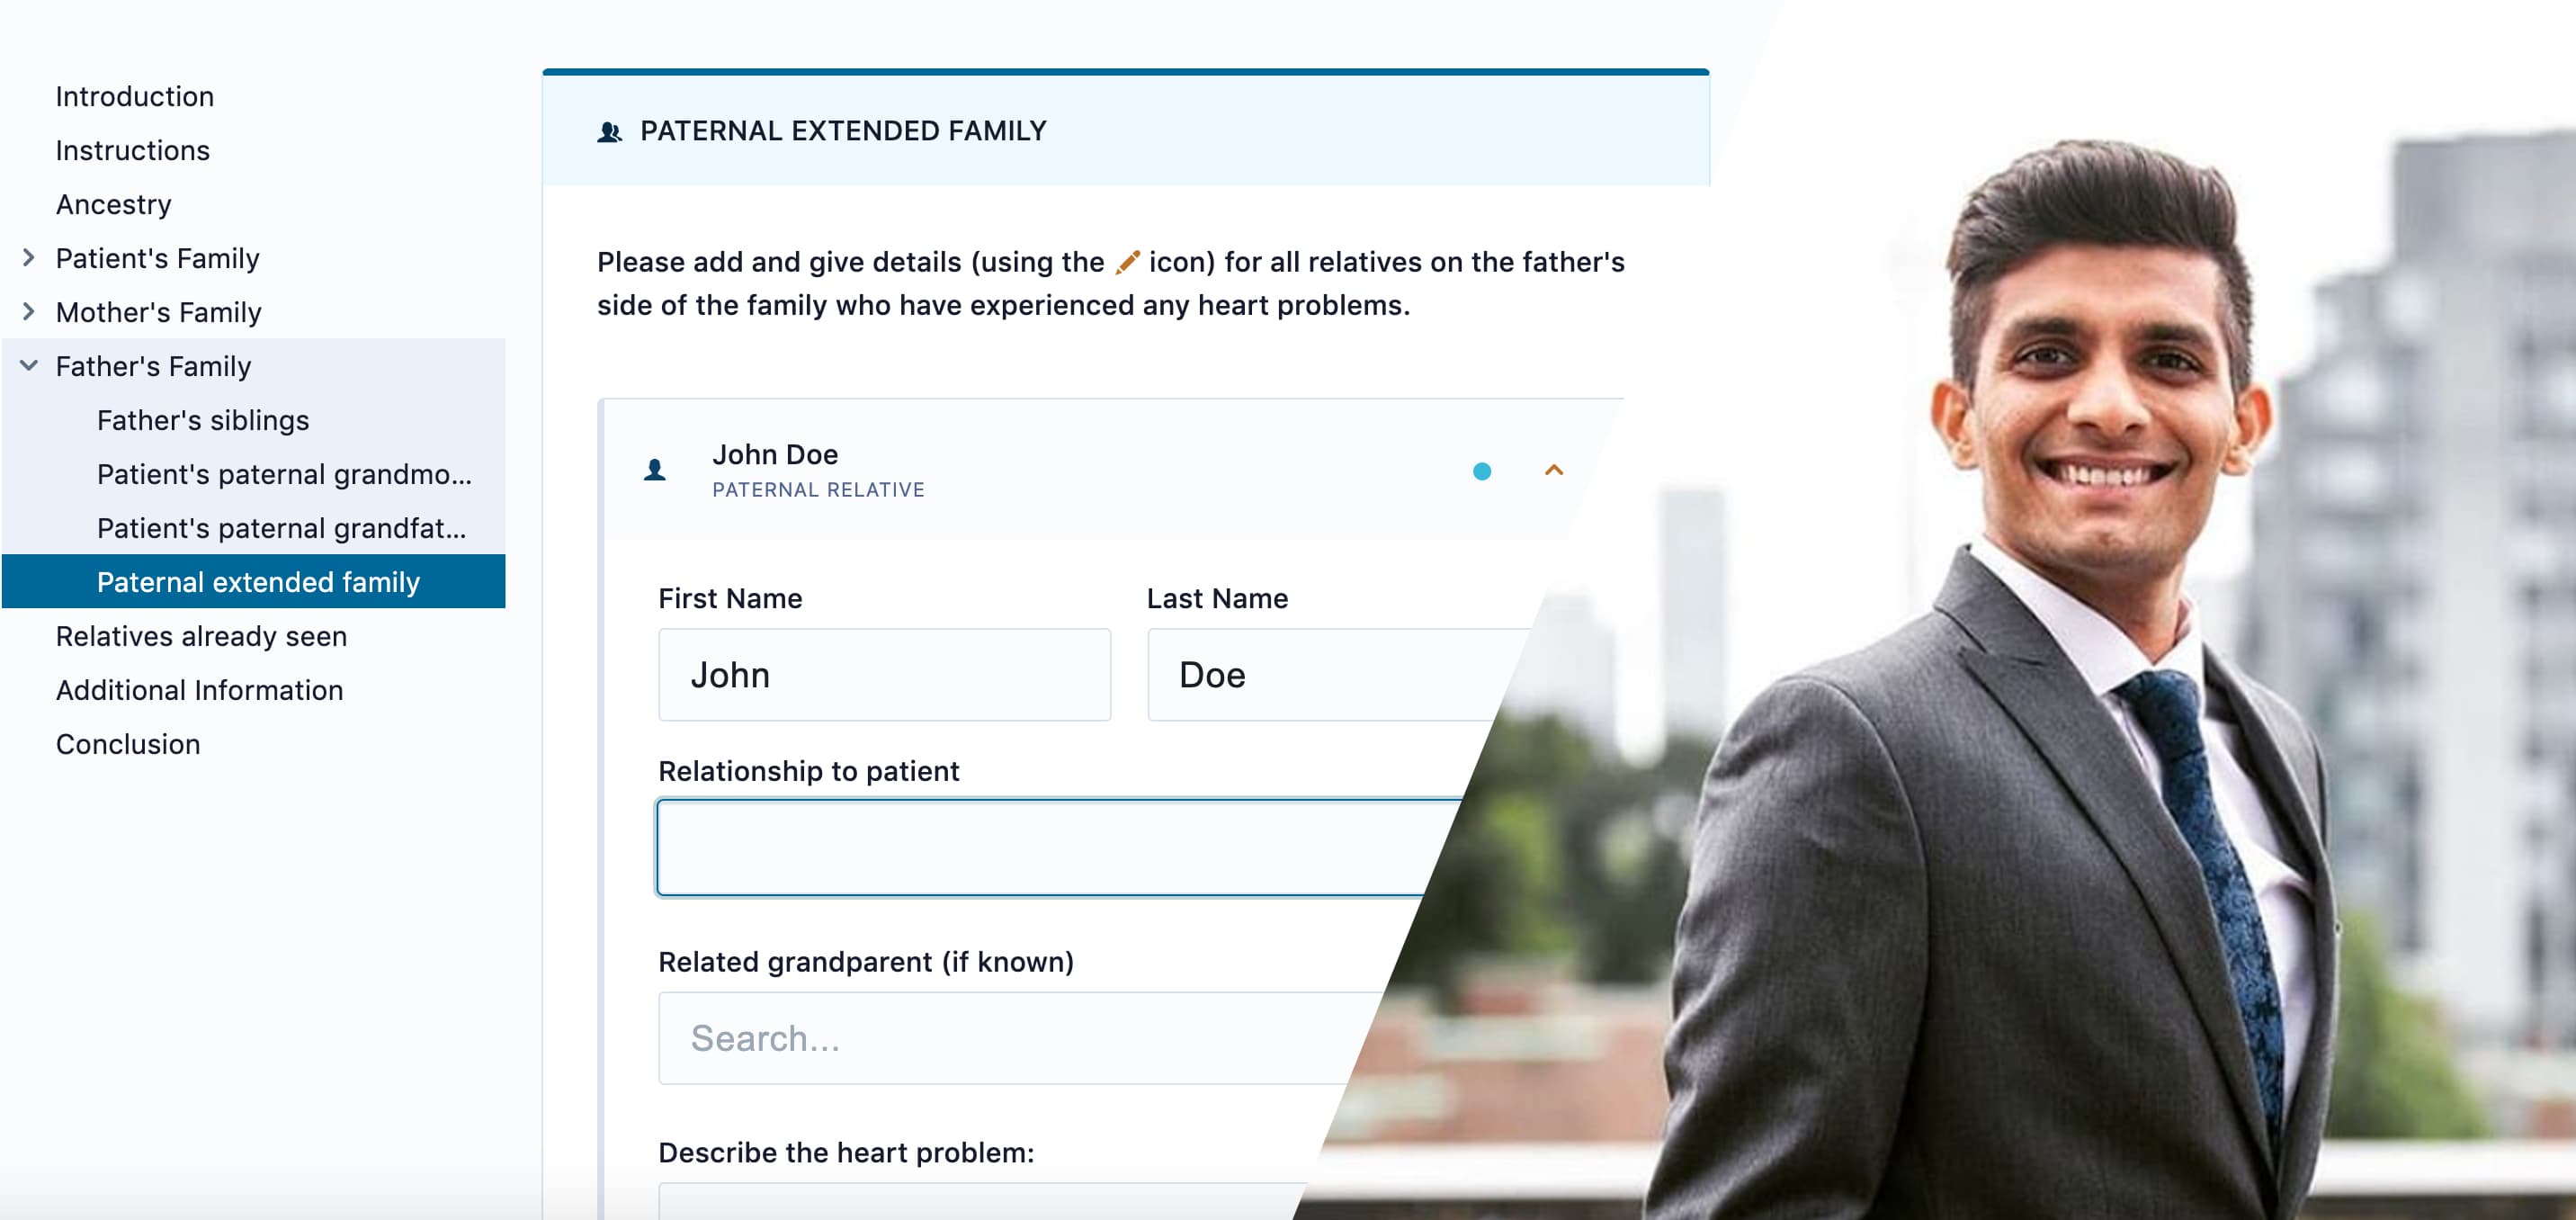 A screengrab of the Pre-Visit Patient Questionnaire as a patient enters their paternal extended family information. The side of the image is intercepted by a diagonally framed image of Senior Product Manager Akshat Khanna, who is in a suit and smiling warmly.